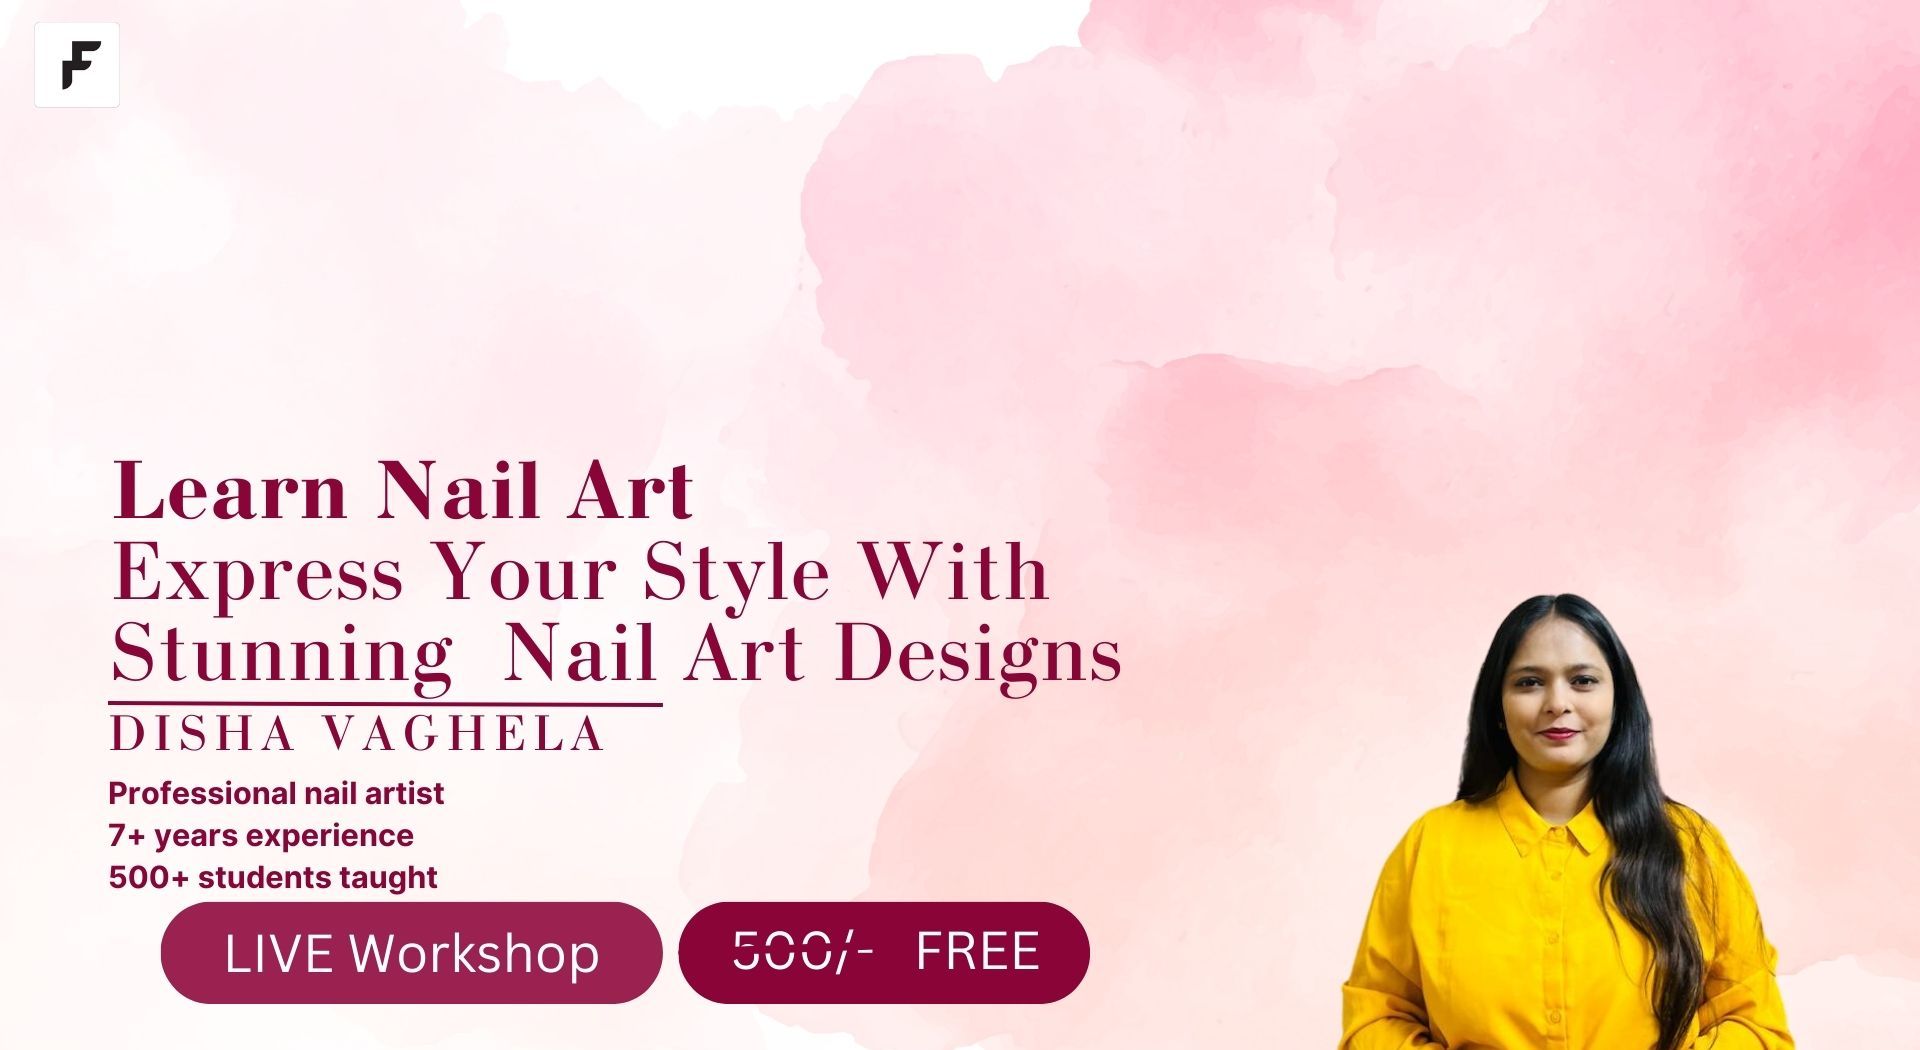 Lakme Academy Jalandhar - Lakmé Academy powered by Aptech is offering an  exclusive short term nail art course to aspiring nail artists. The  innovative and contemporary nail art course gives you hands-on